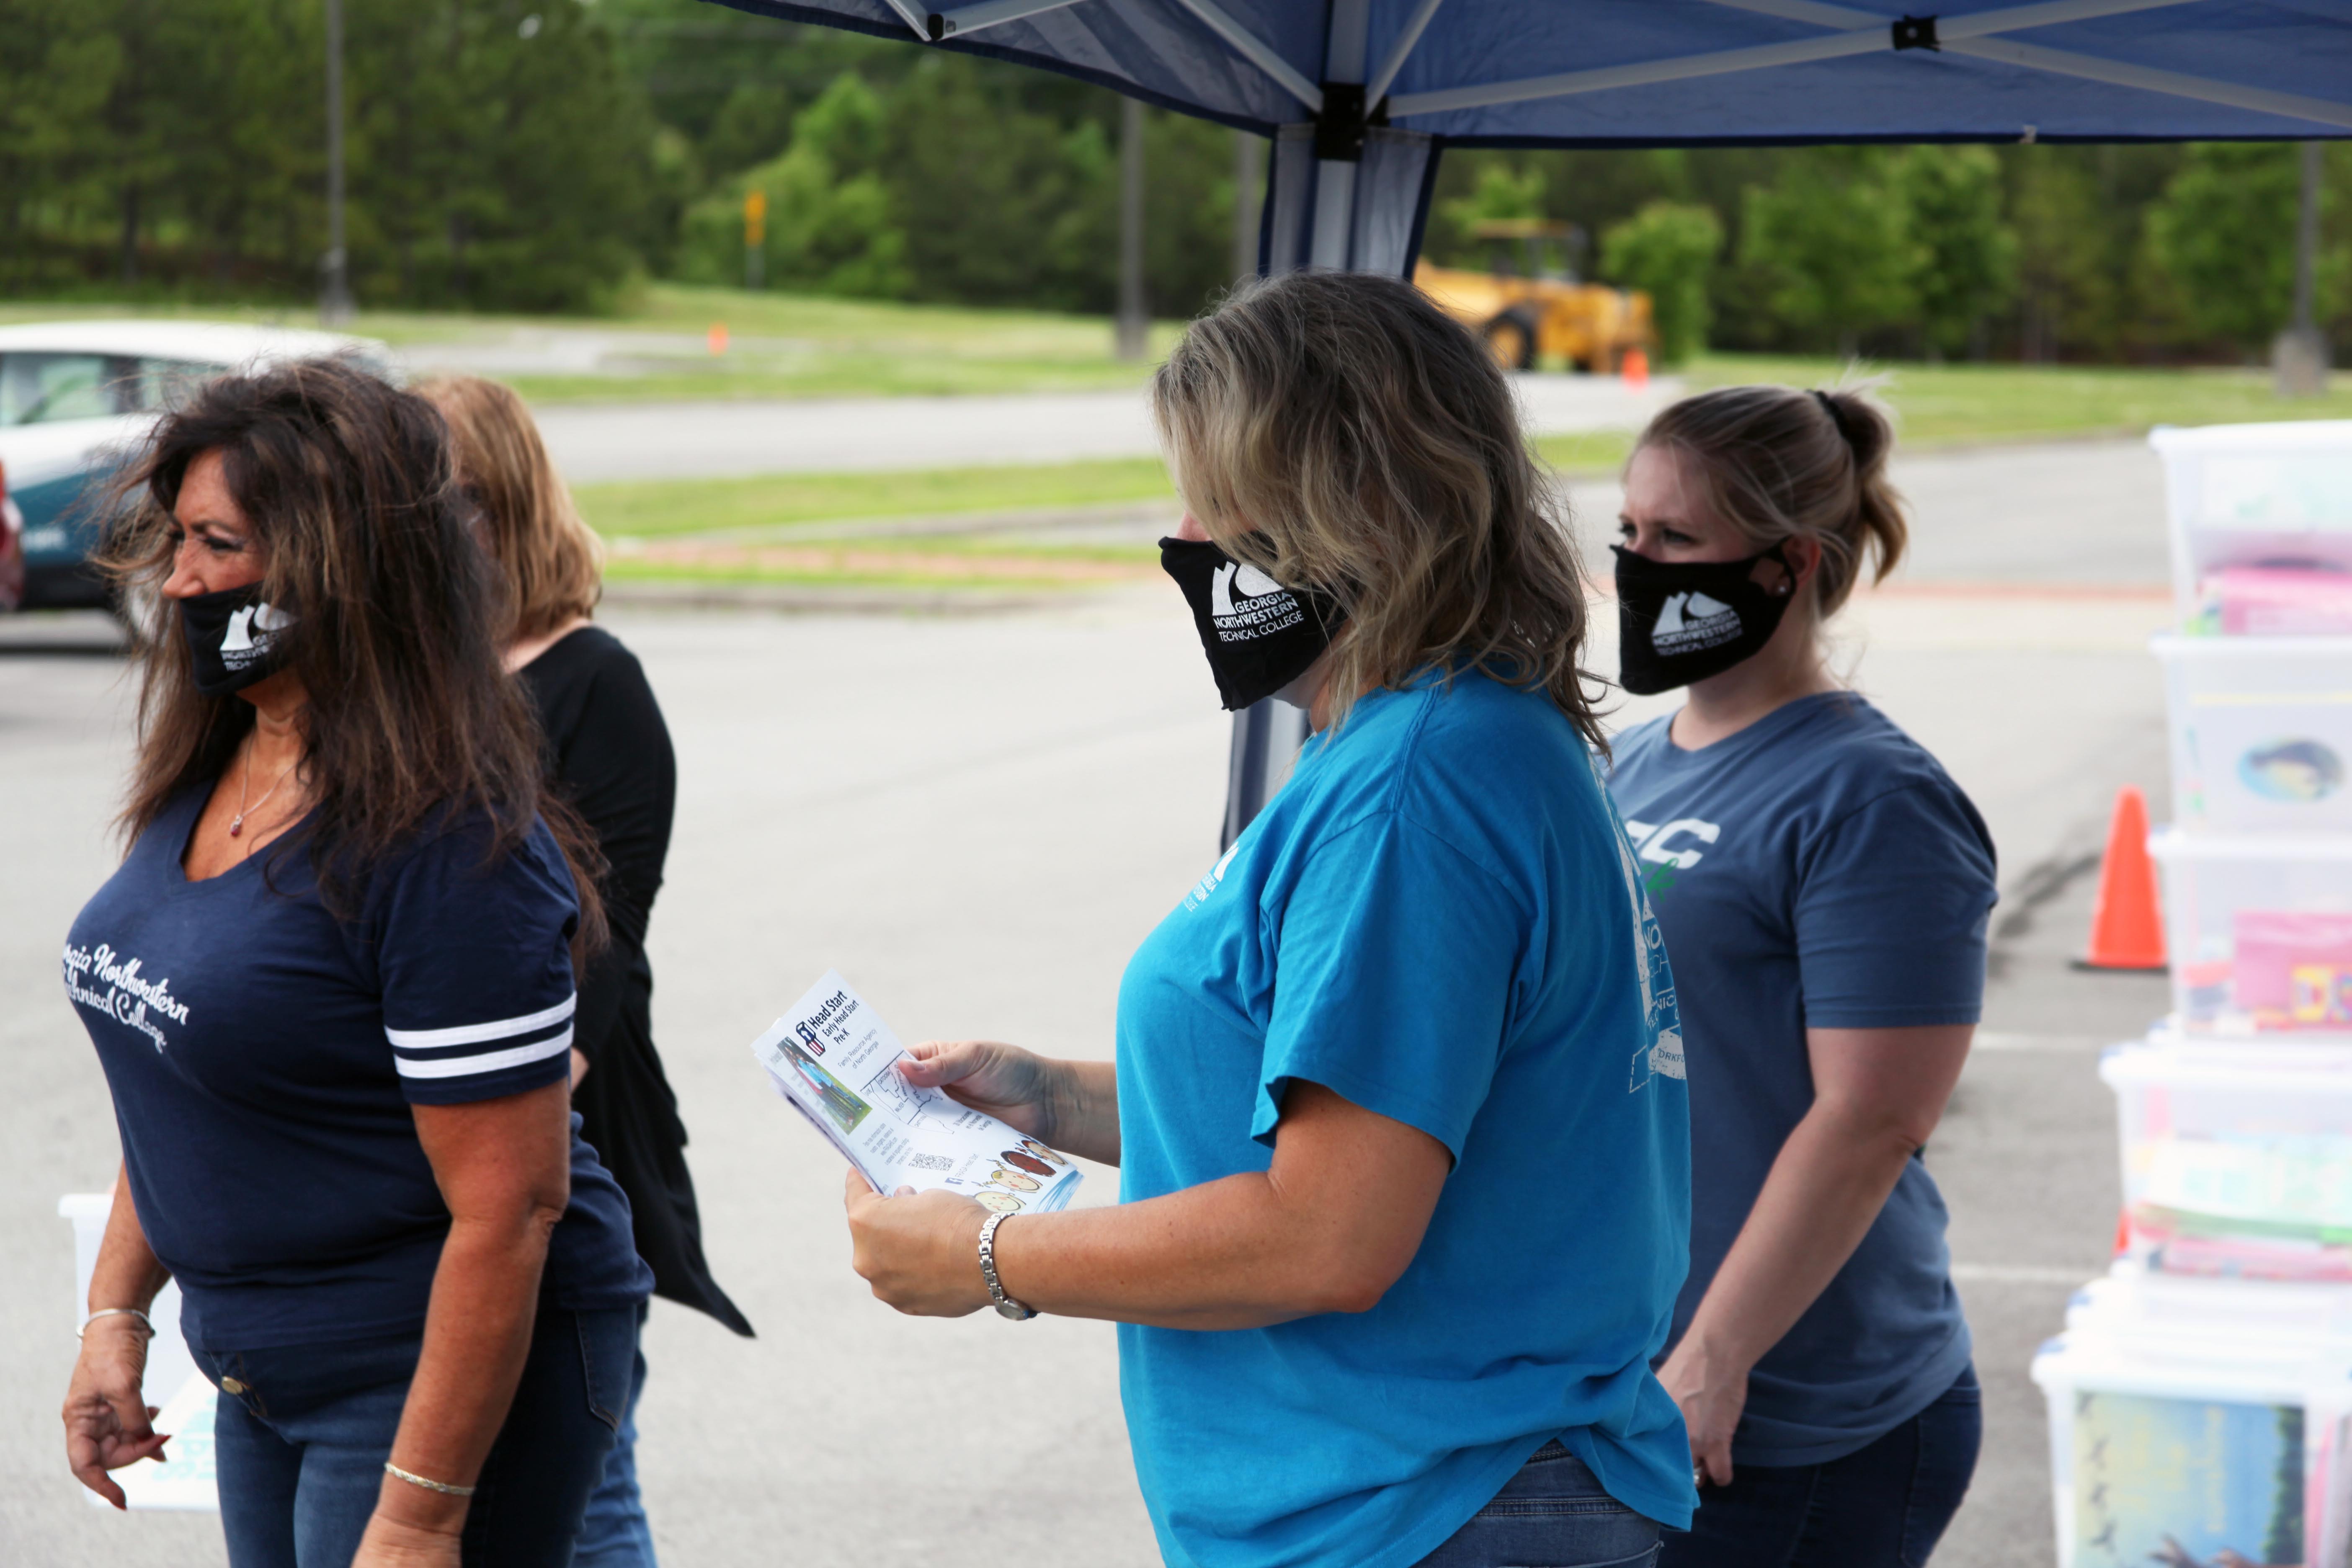 Marilyn Grandstaff (from left), GNTC Career Services coordinator; Tracy Gentry, GNTC student success coach; and Monica Swank, GNTC Administrative Services, stand ready for the next wave of cars to arrive during the mobile food pantry on Wednesday, May 27.